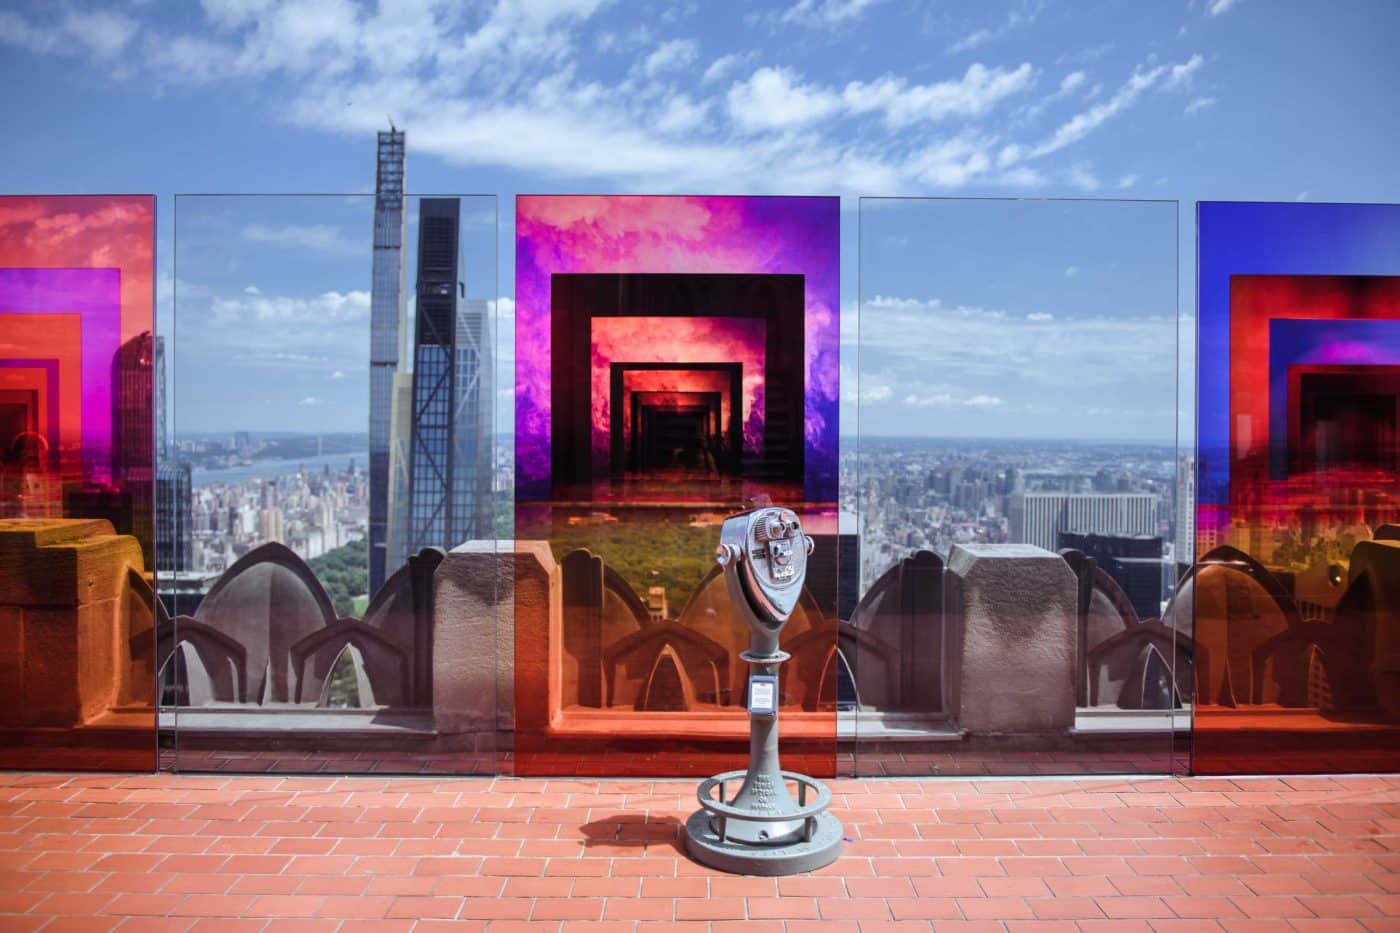 Pieces from Sarah Mehoyas's “Speculations” series are installed on Rockefeller Center's Top of the Rock, in New York.